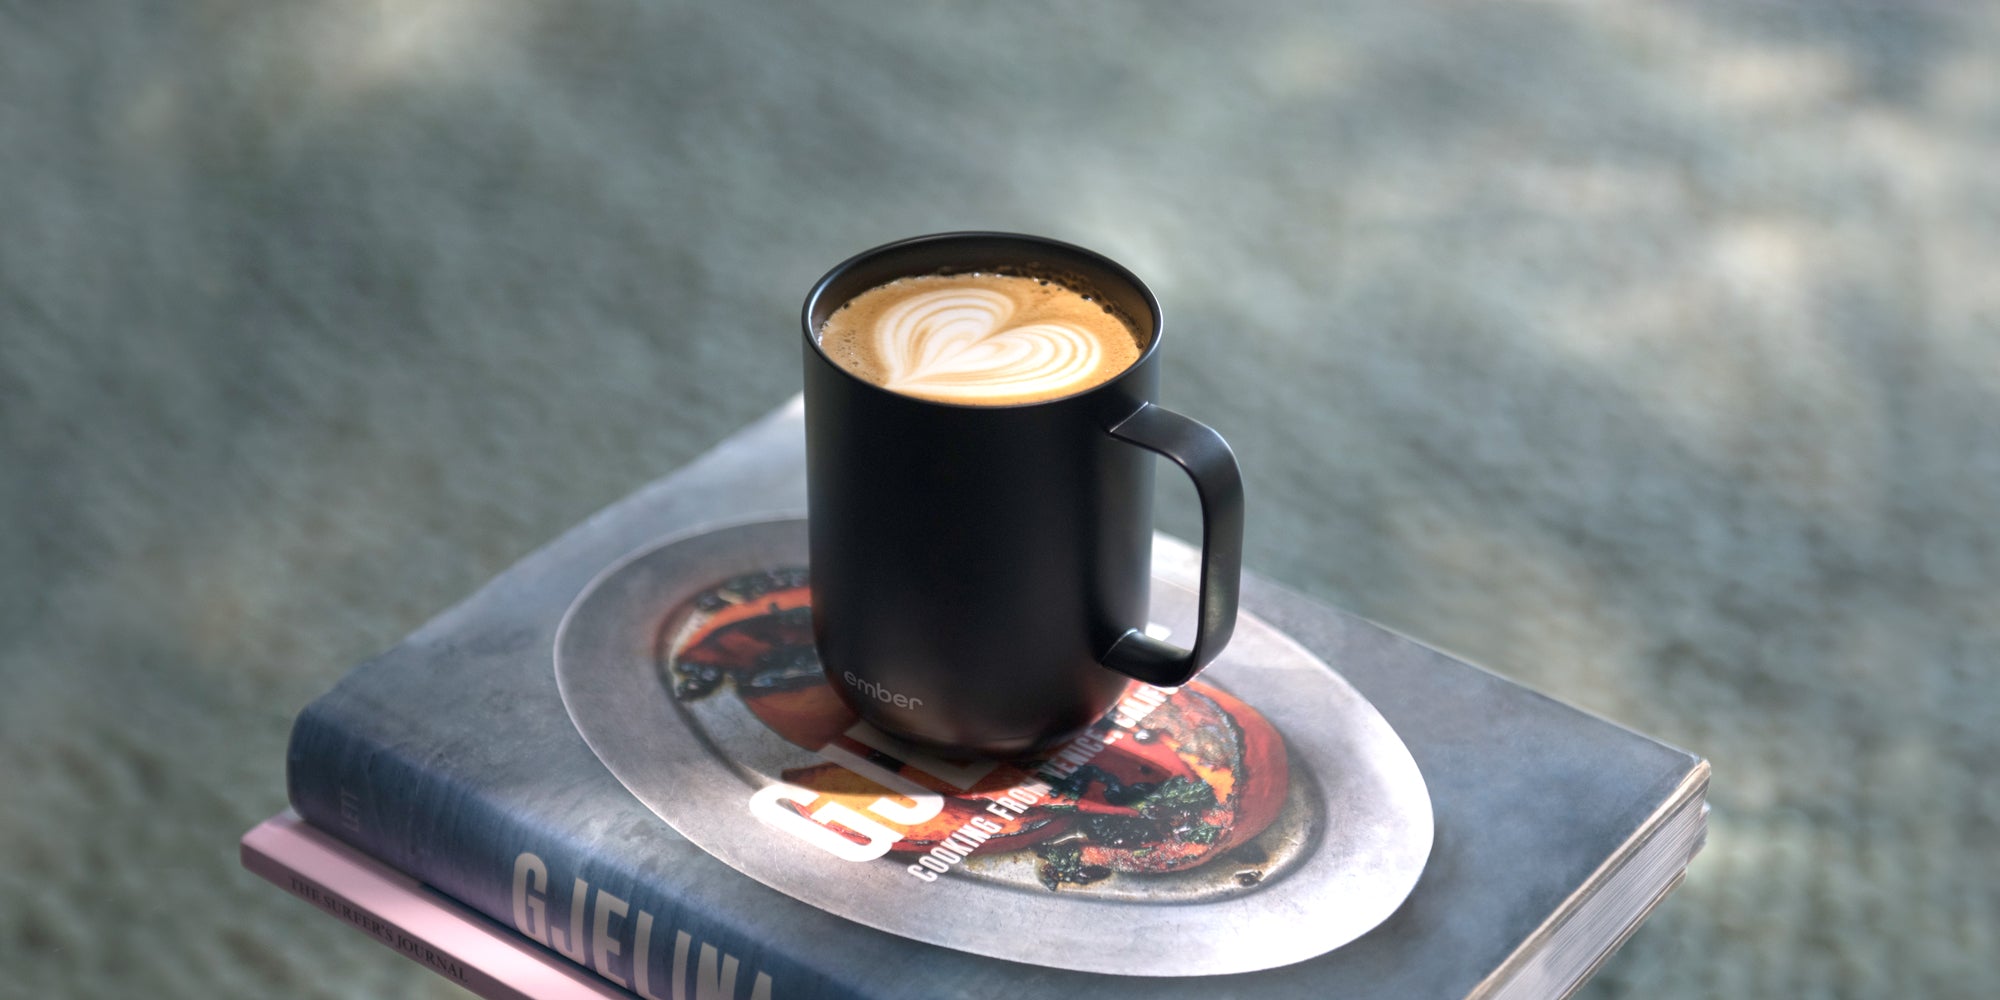 Latte art coffee on wooden table, cozy image for marketing